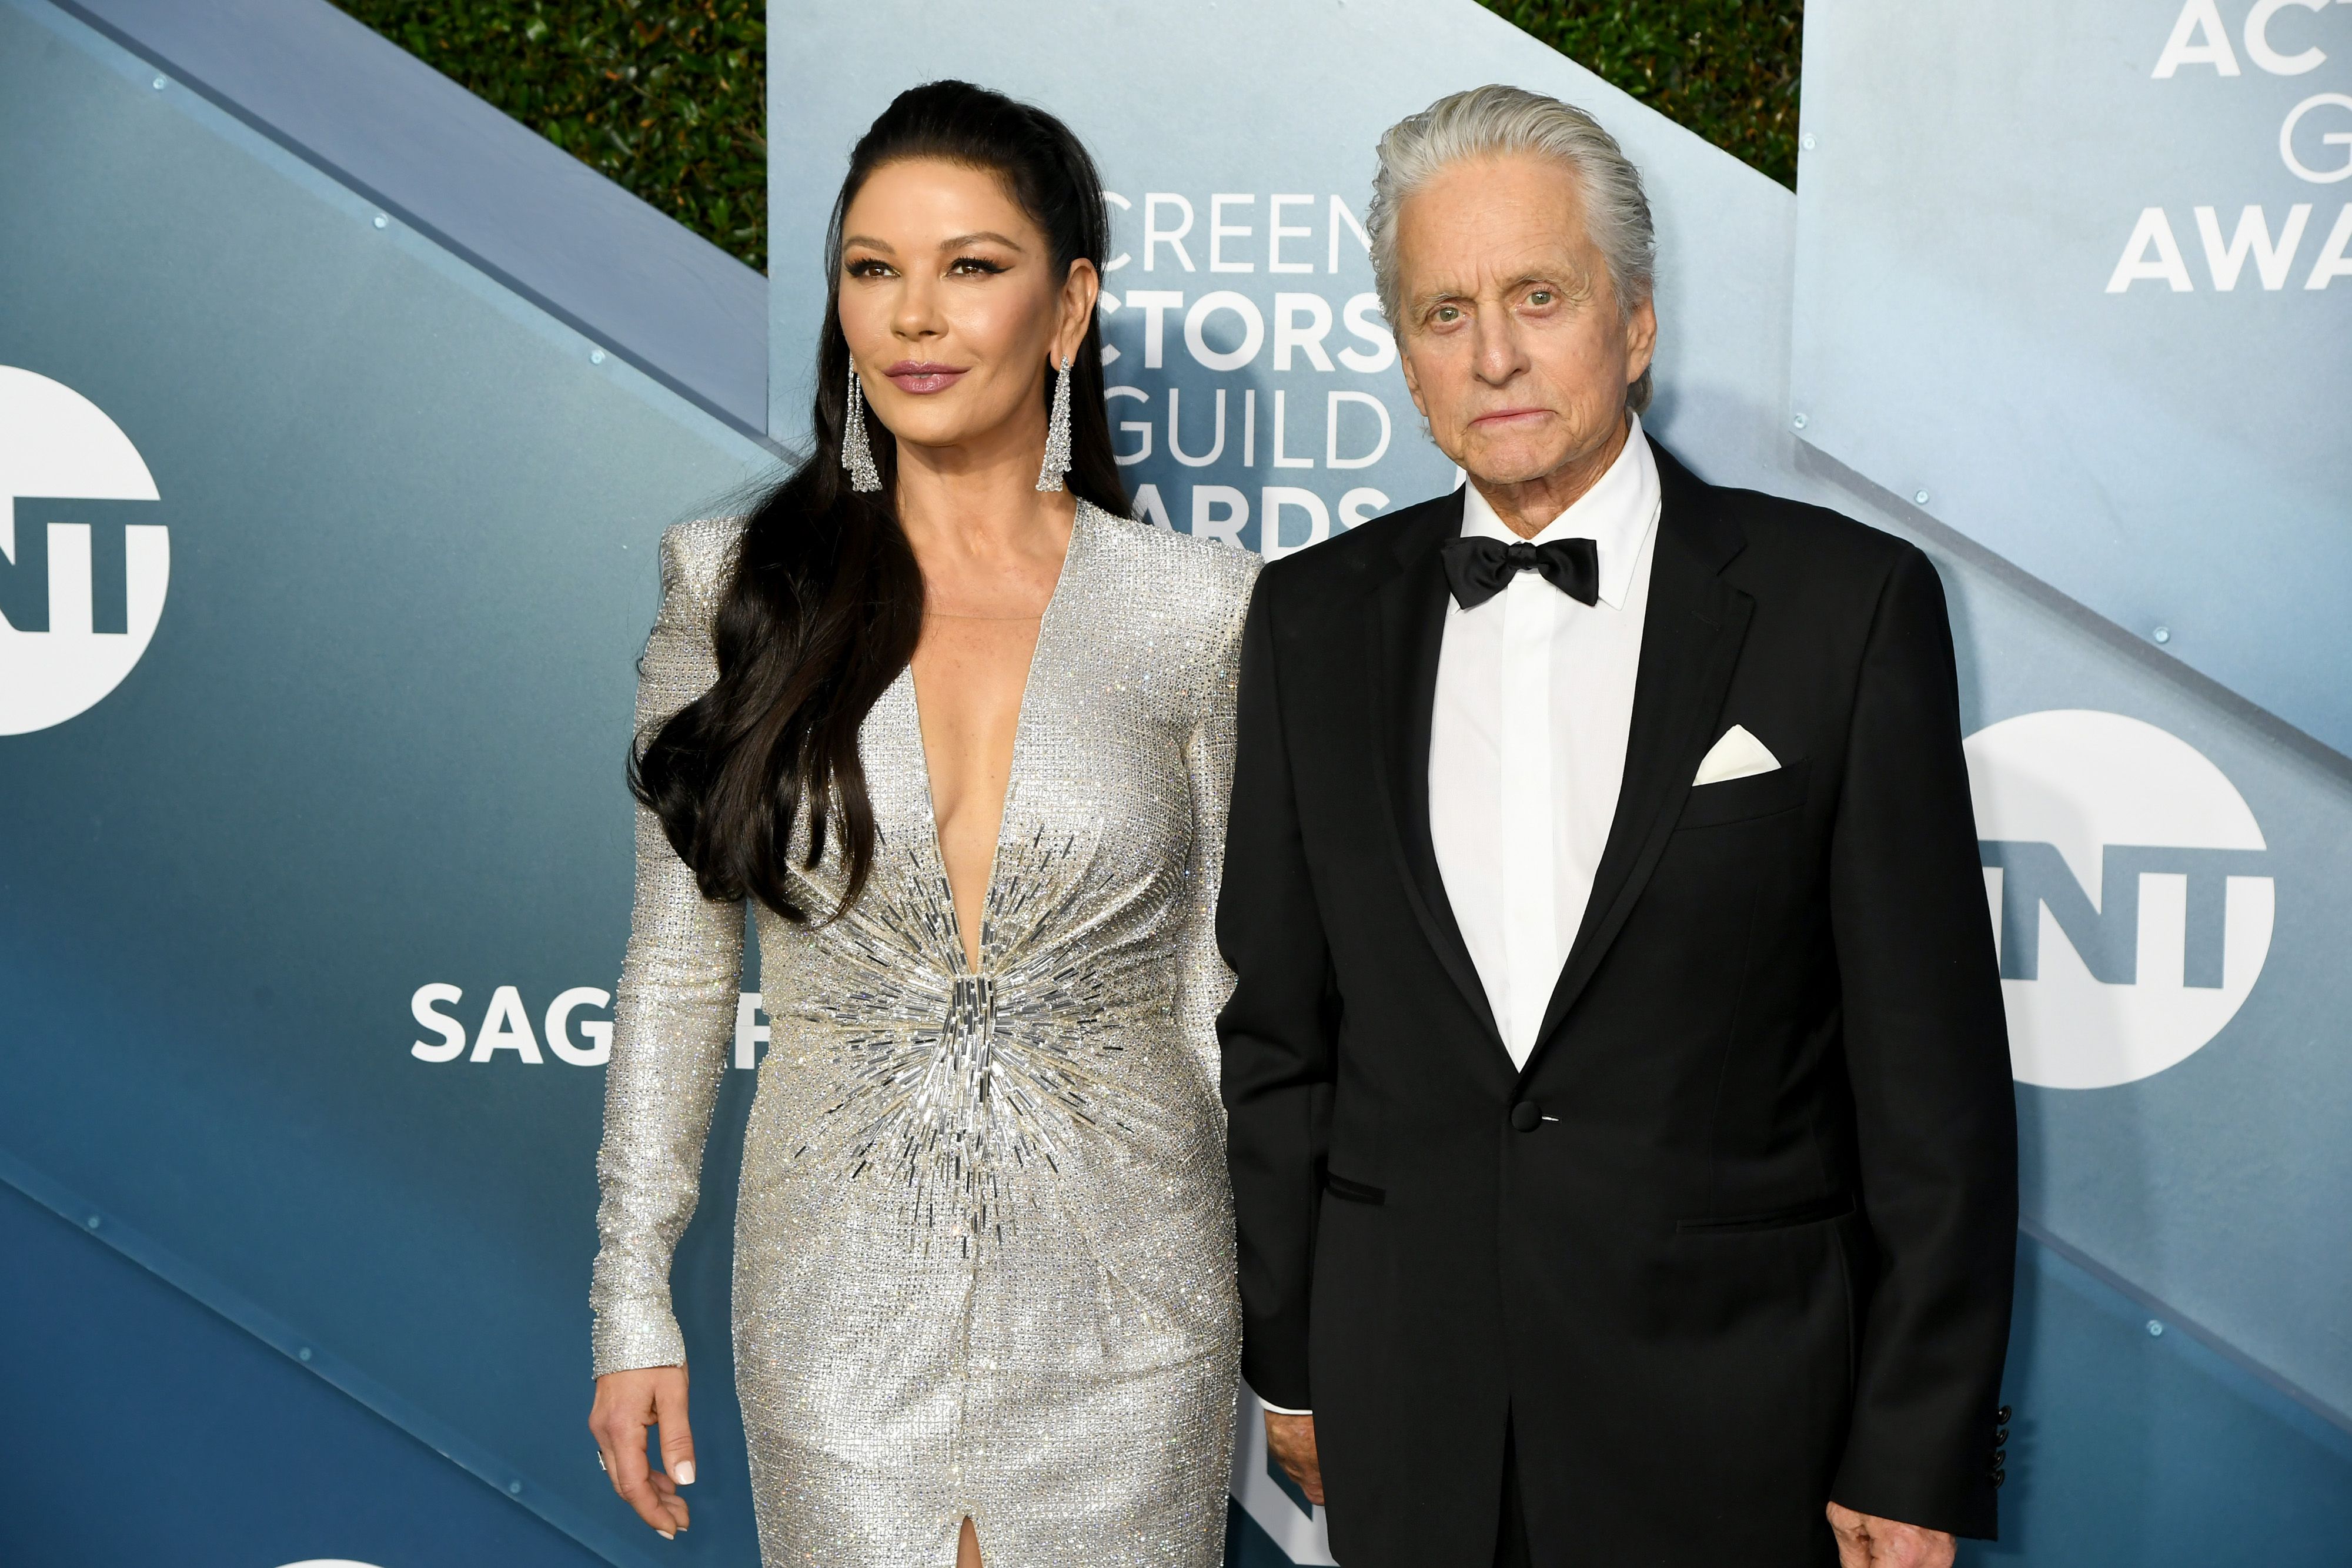 Catherine Zeta-Jones and Michael Douglas at the 26th Annual Screen Actors Guild Awards at The Shrine Auditorium on January 19, 2020 | Photo: Getty Images